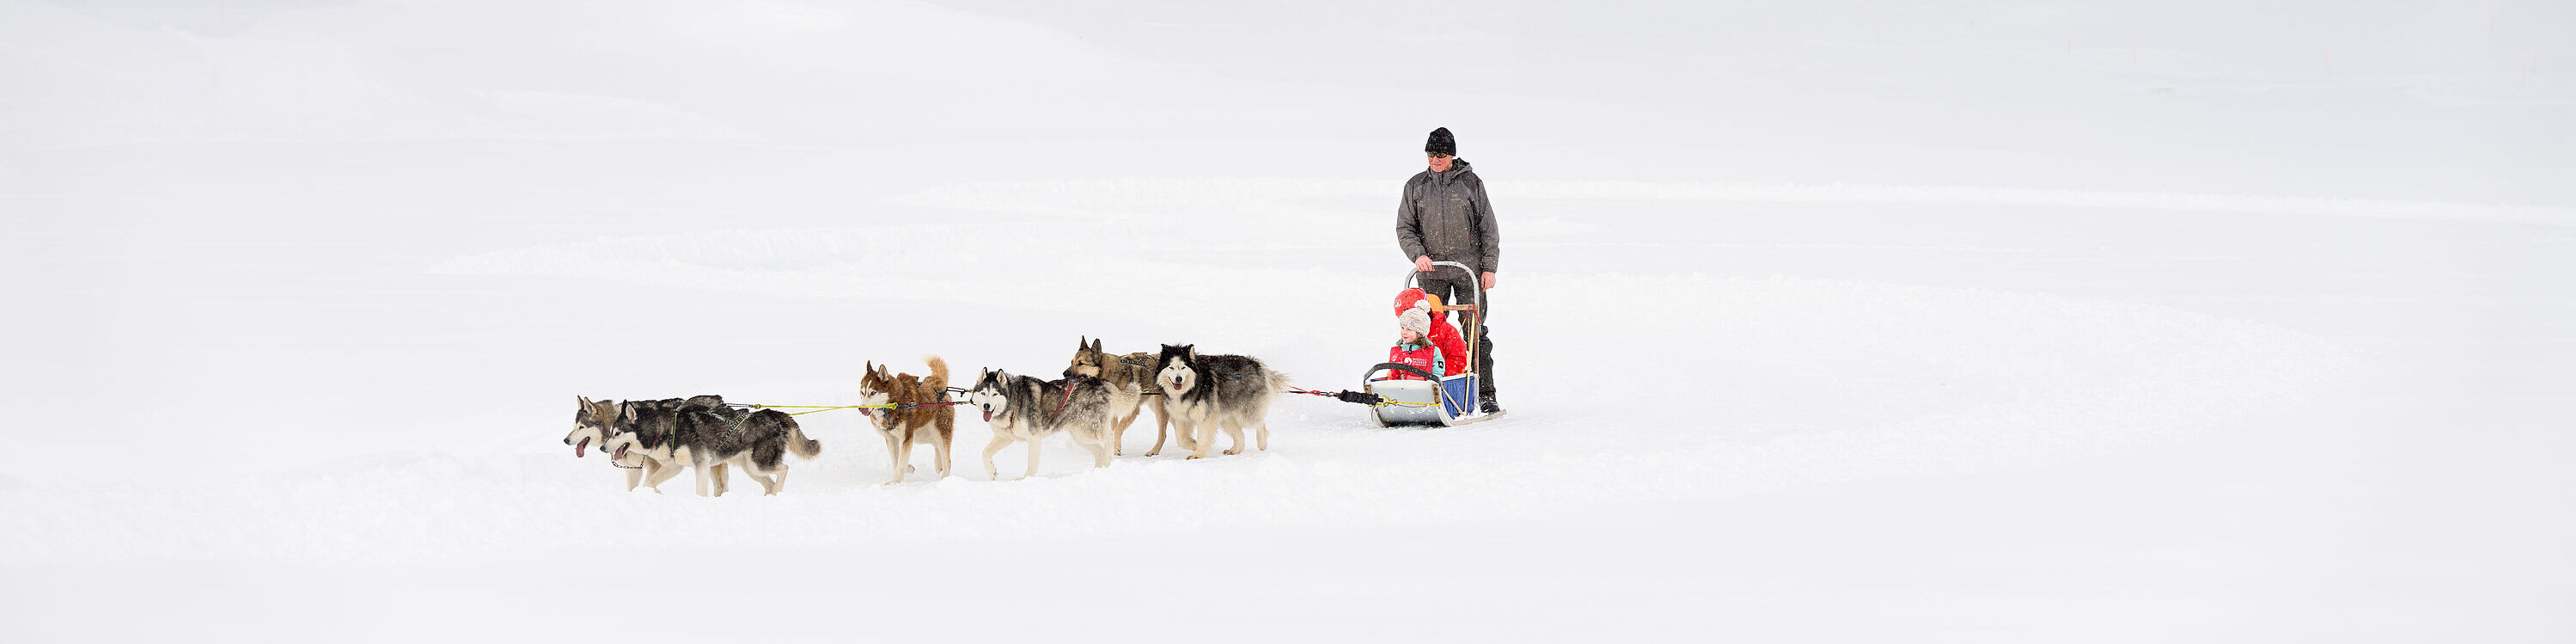 A man is steering a sledge pulled by six Huskies, with two young children on it